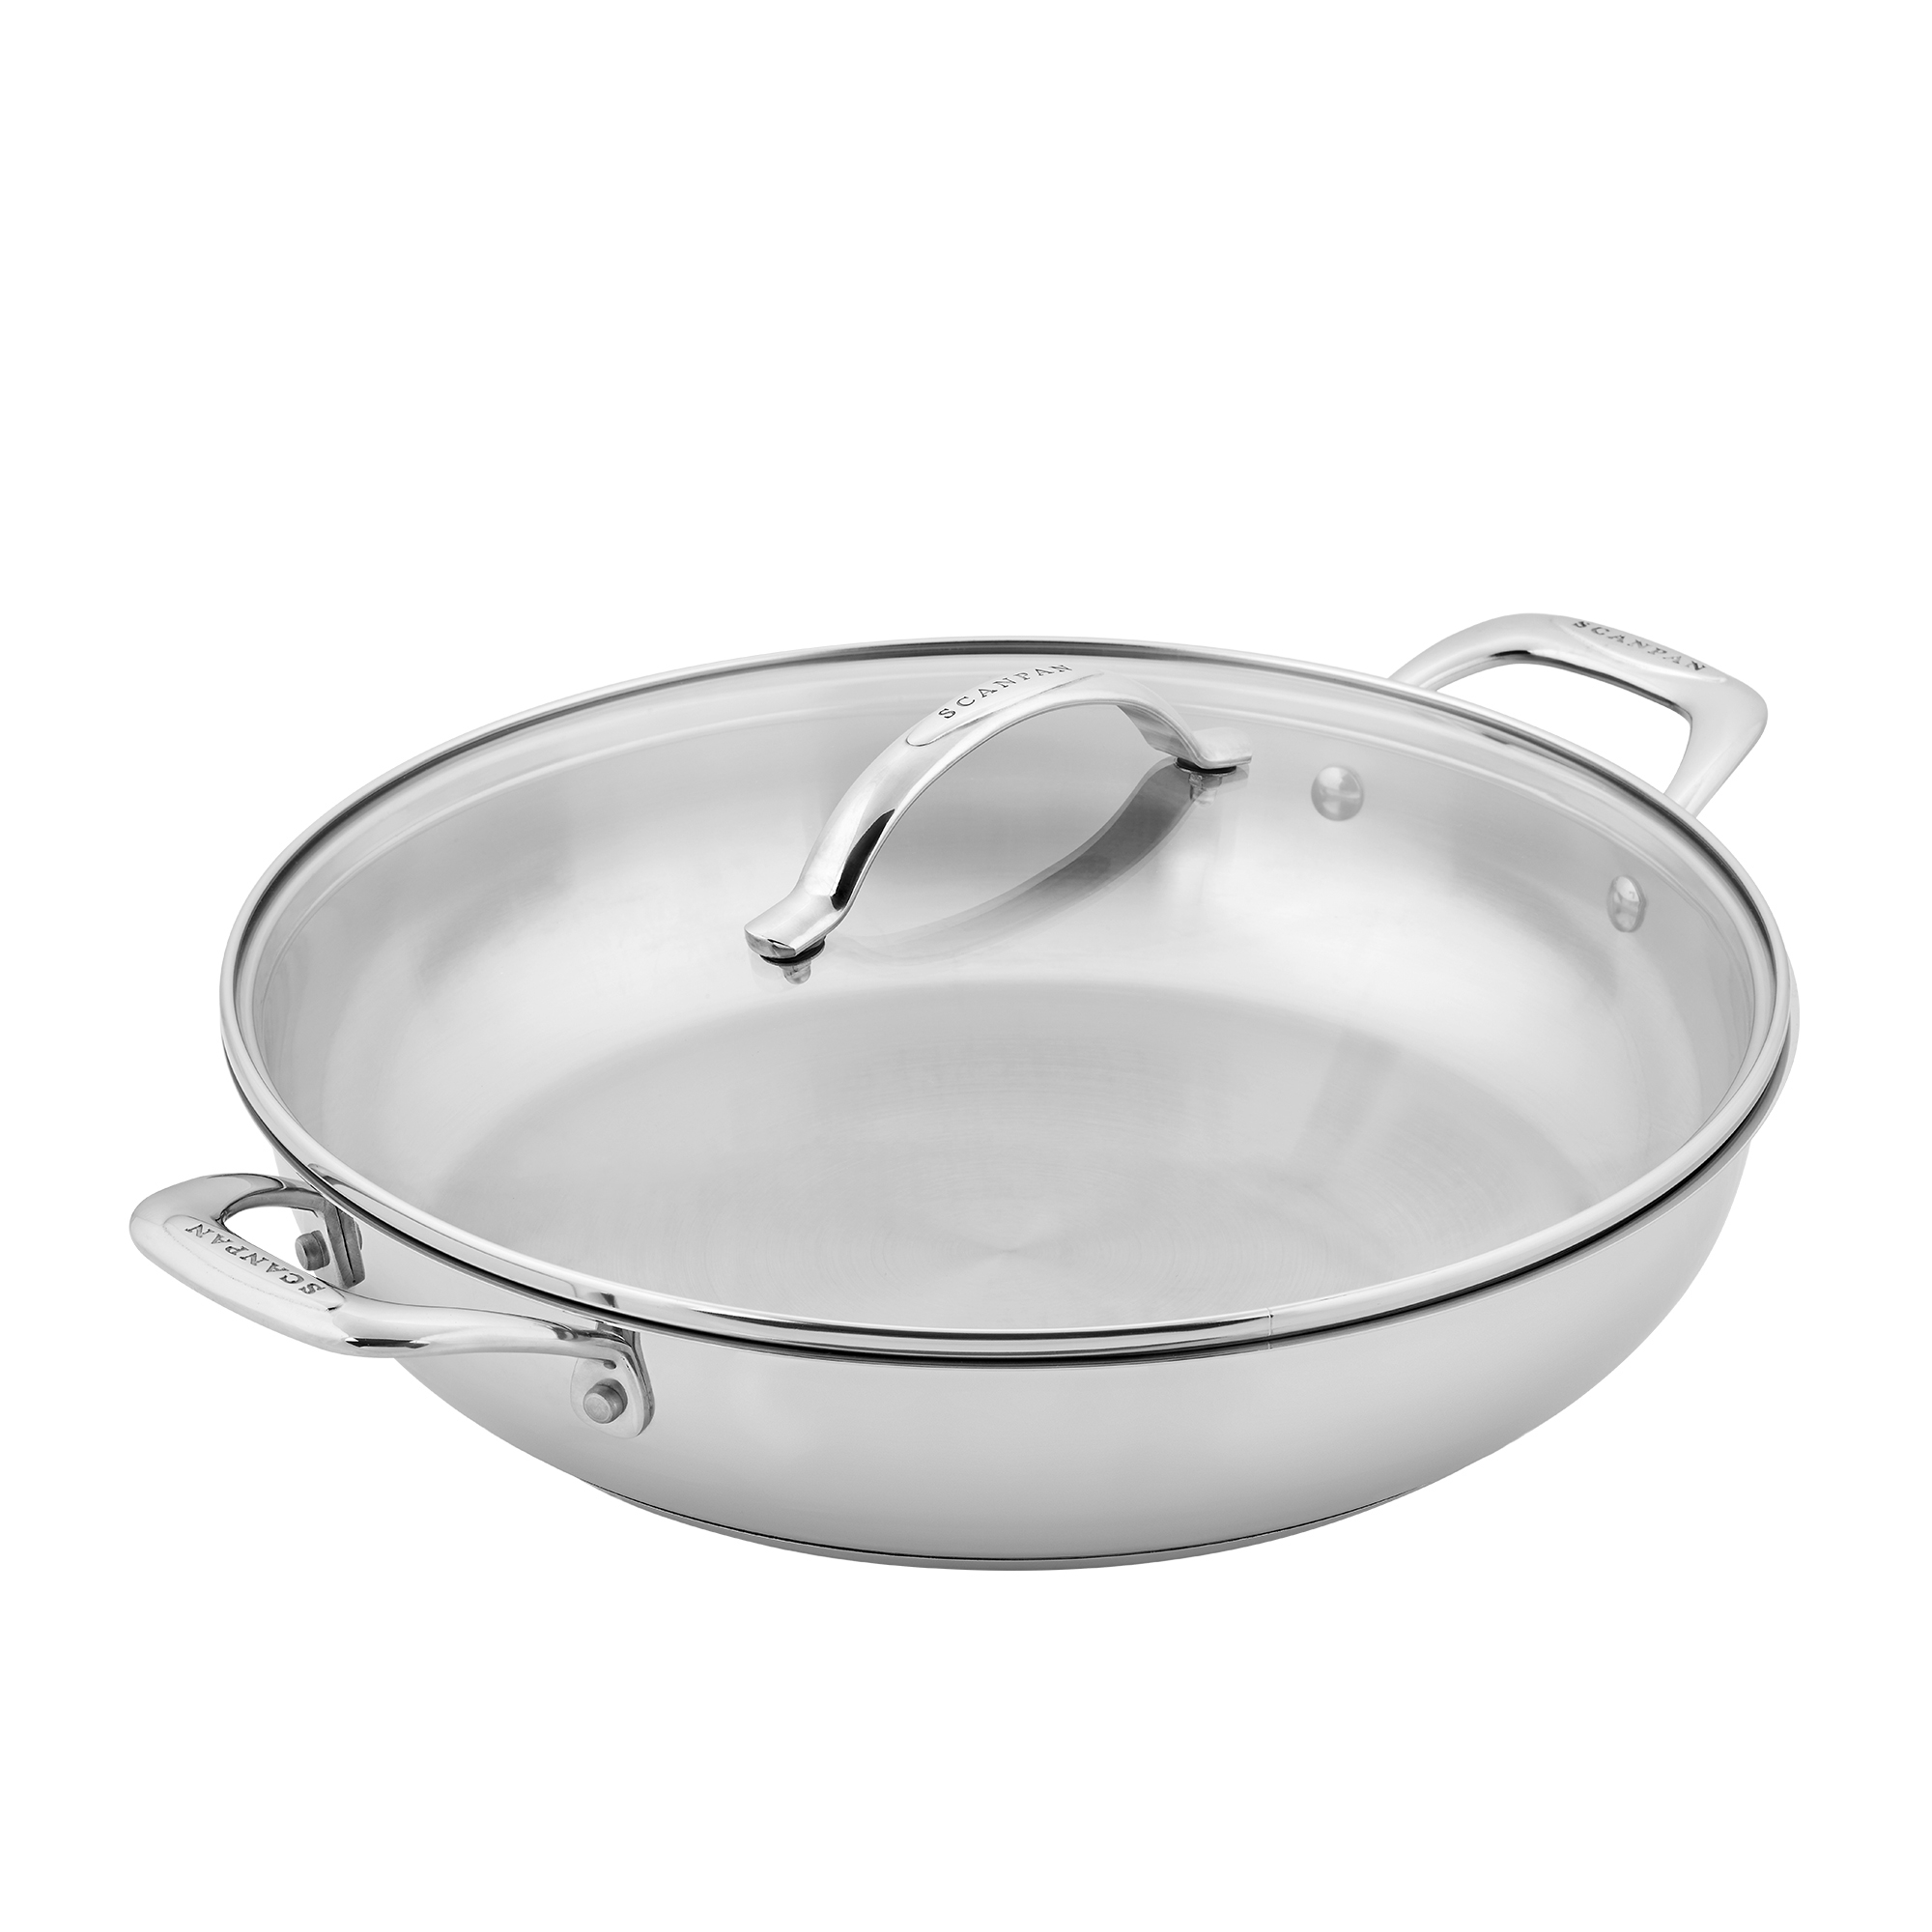 Scanpan STS Stainless Steel Chef's Pan 32cm Image 1